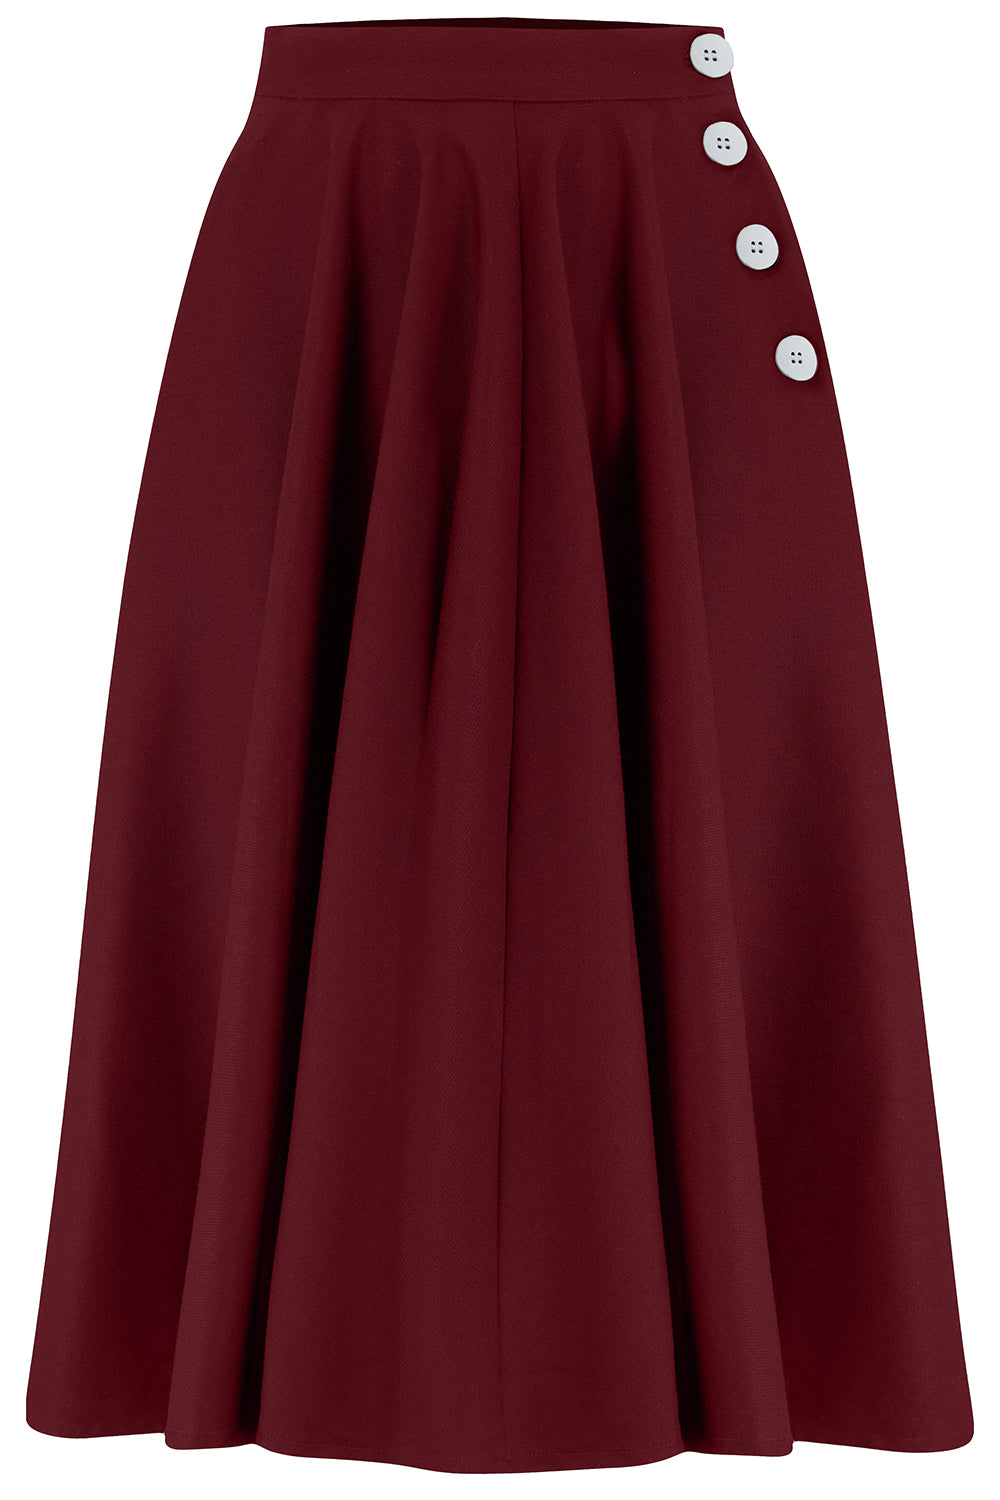 "Sylvia" Tailored Skirt in Burgundy , Classic & Authentic 1940s Vintage Inspired Style - True and authentic vintage style clothing, inspired by the Classic styles of CC41 , WW2 and the fun 1950s RocknRoll era, for everyday wear plus events like Goodwood Revival, Twinwood Festival and Viva Las Vegas Rockabilly Weekend Rock n Romance The Seamstress Of Bloomsbury